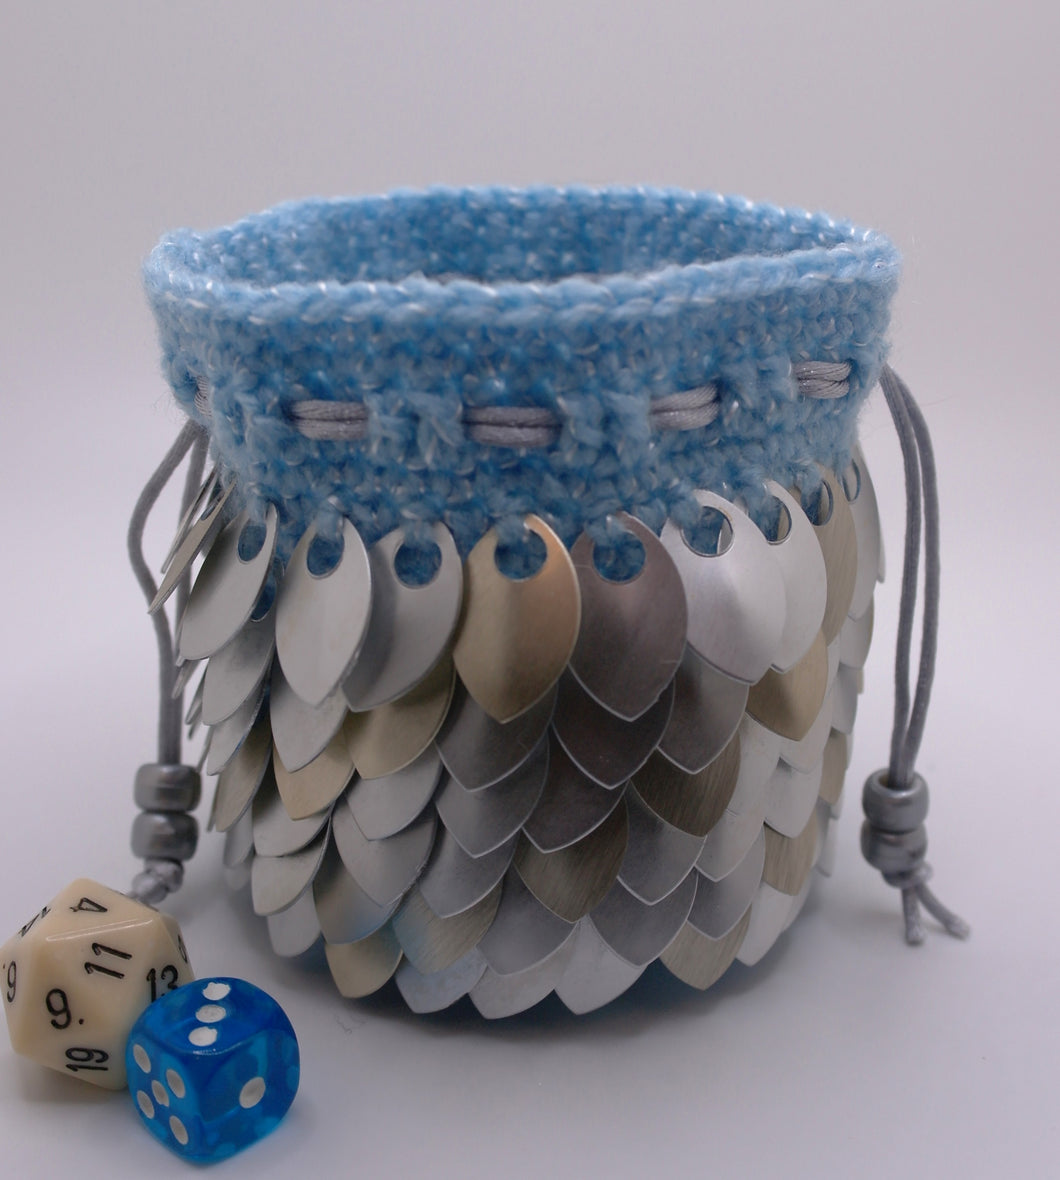 Platinum Dragon Dice Bag - Silver & Champagne Metallic Scales with light blue and silver-flecked yarn